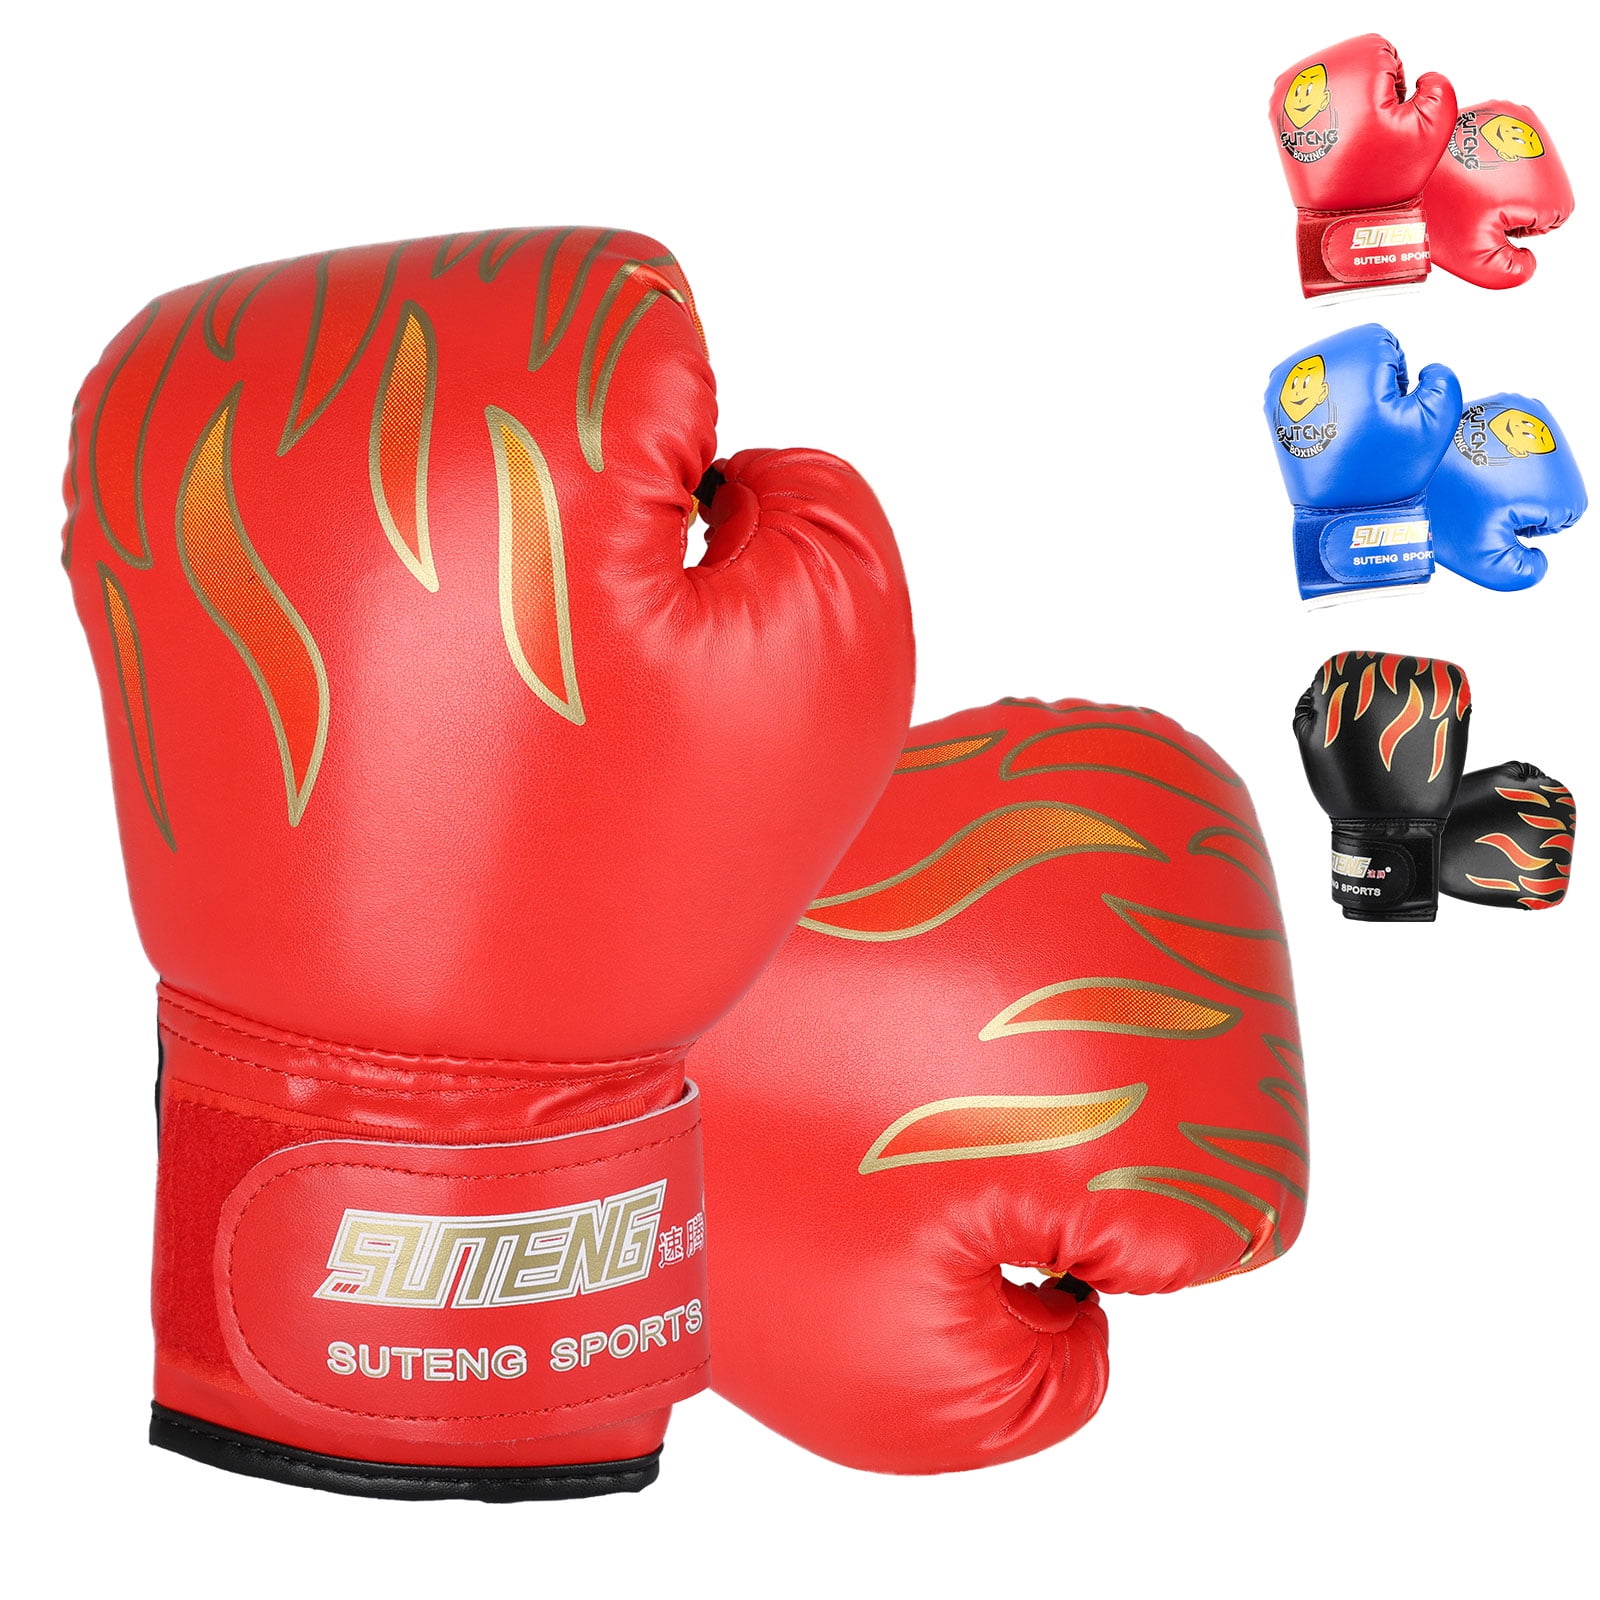 Pro Box Boxing Gloves Xtreme Collection Junior PU Sparring Training Gloves Kids 